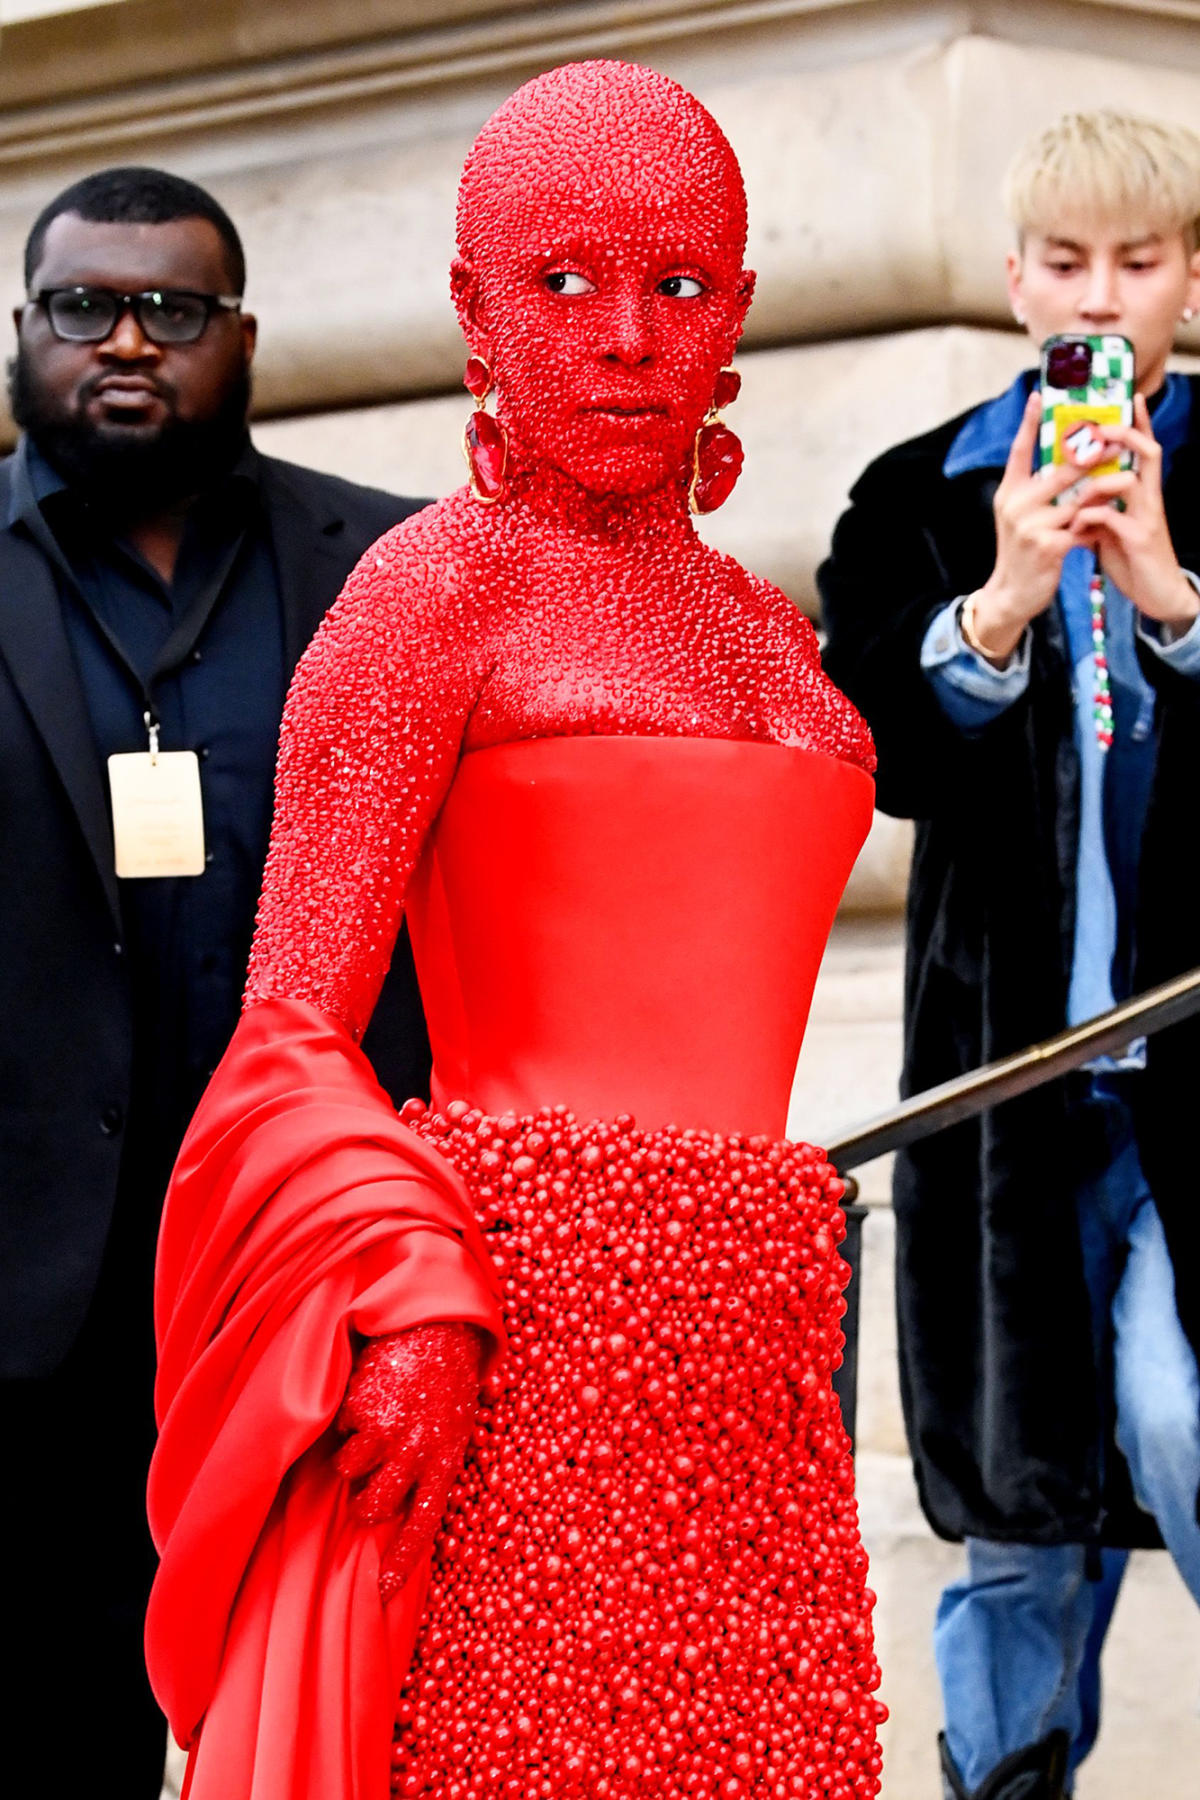 Doja Cat Covers Her Entire Body in 30,000 Red Crystals for Schiaparelli